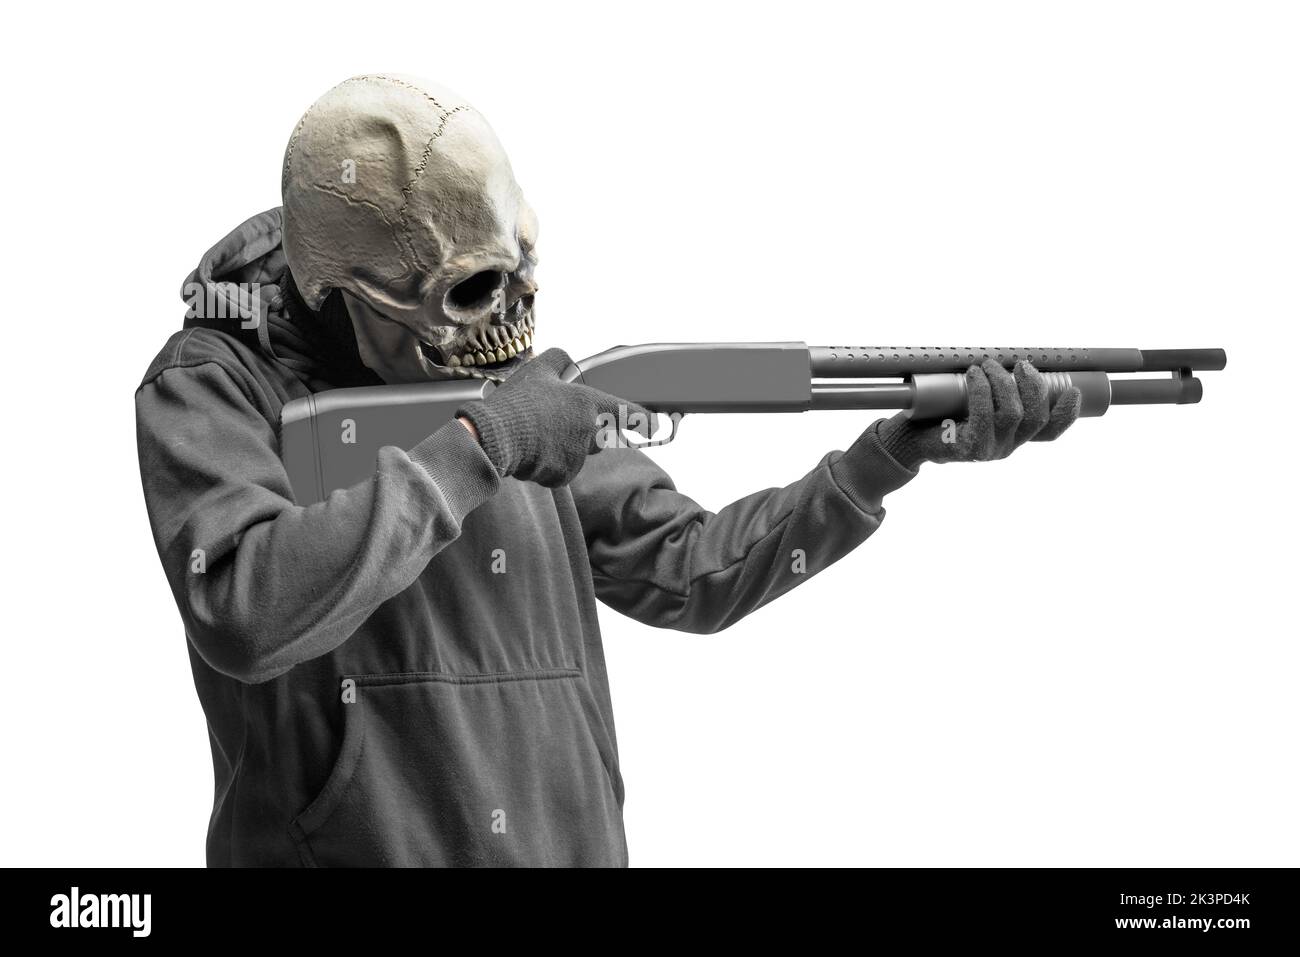 Man with a skull head costume for Halloween holding gun isolated over white background Stock Photo